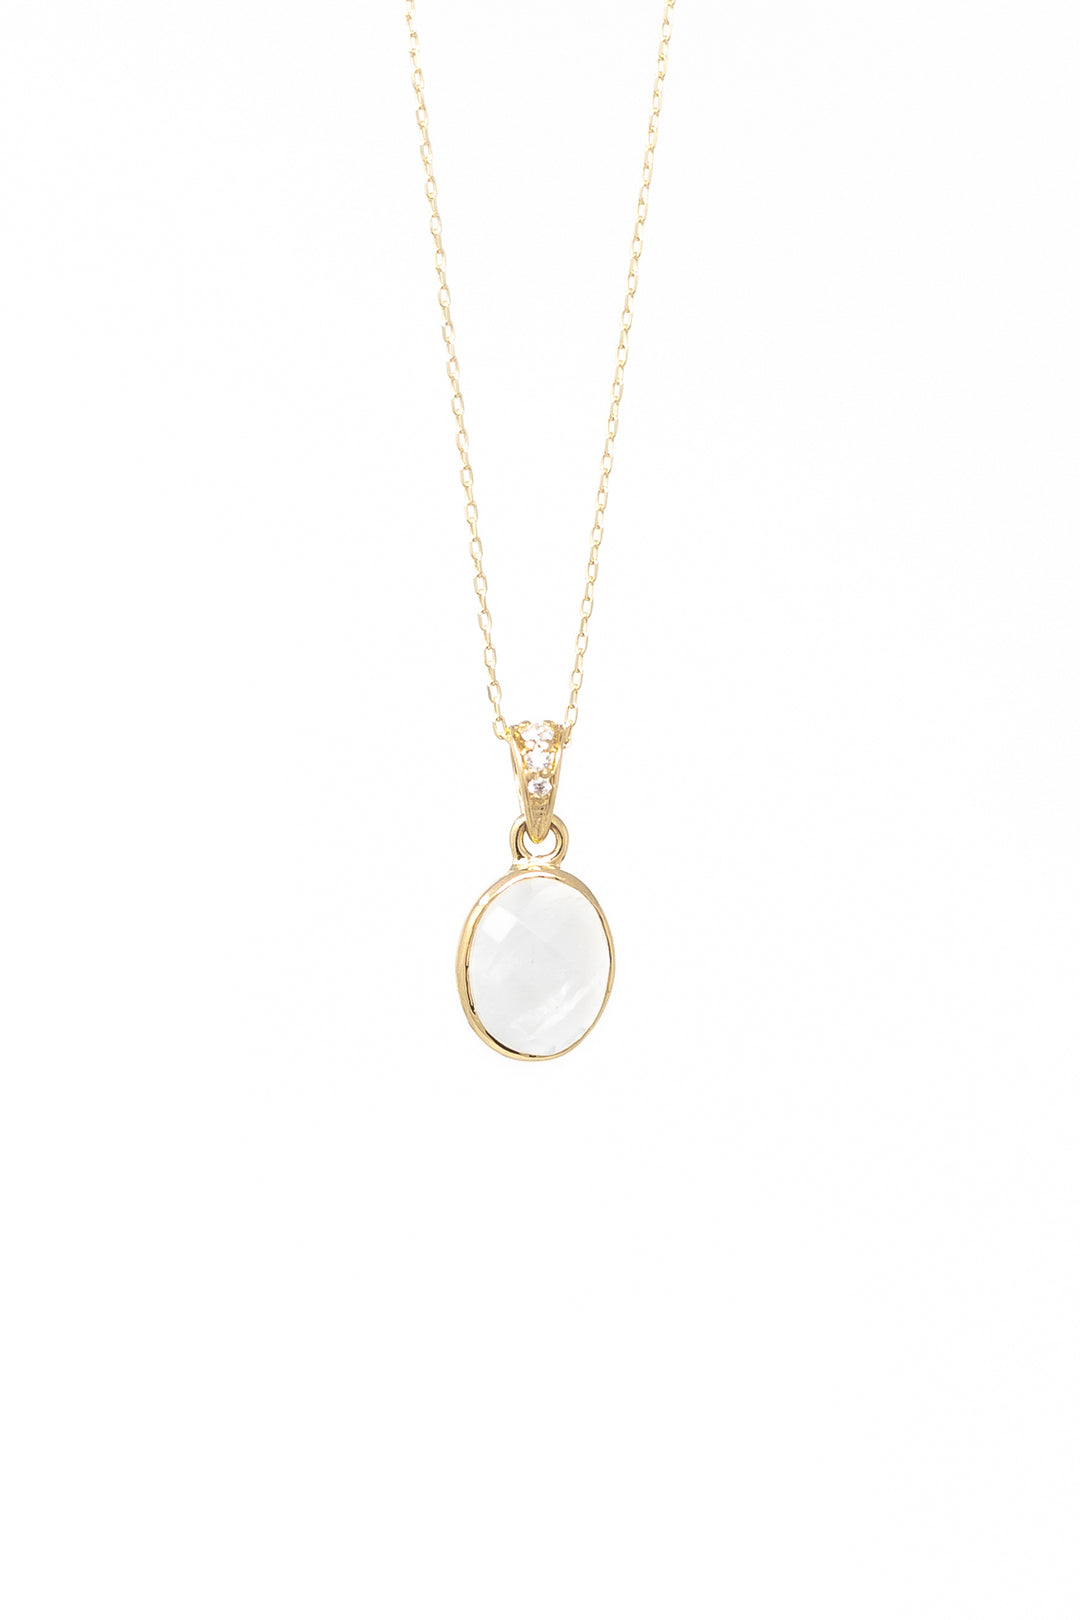 .03ct DIA.BAIL/1.8ct MOONSTONE OVAL PENDANT NECKLACE - Kingfisher Road - Online Boutique